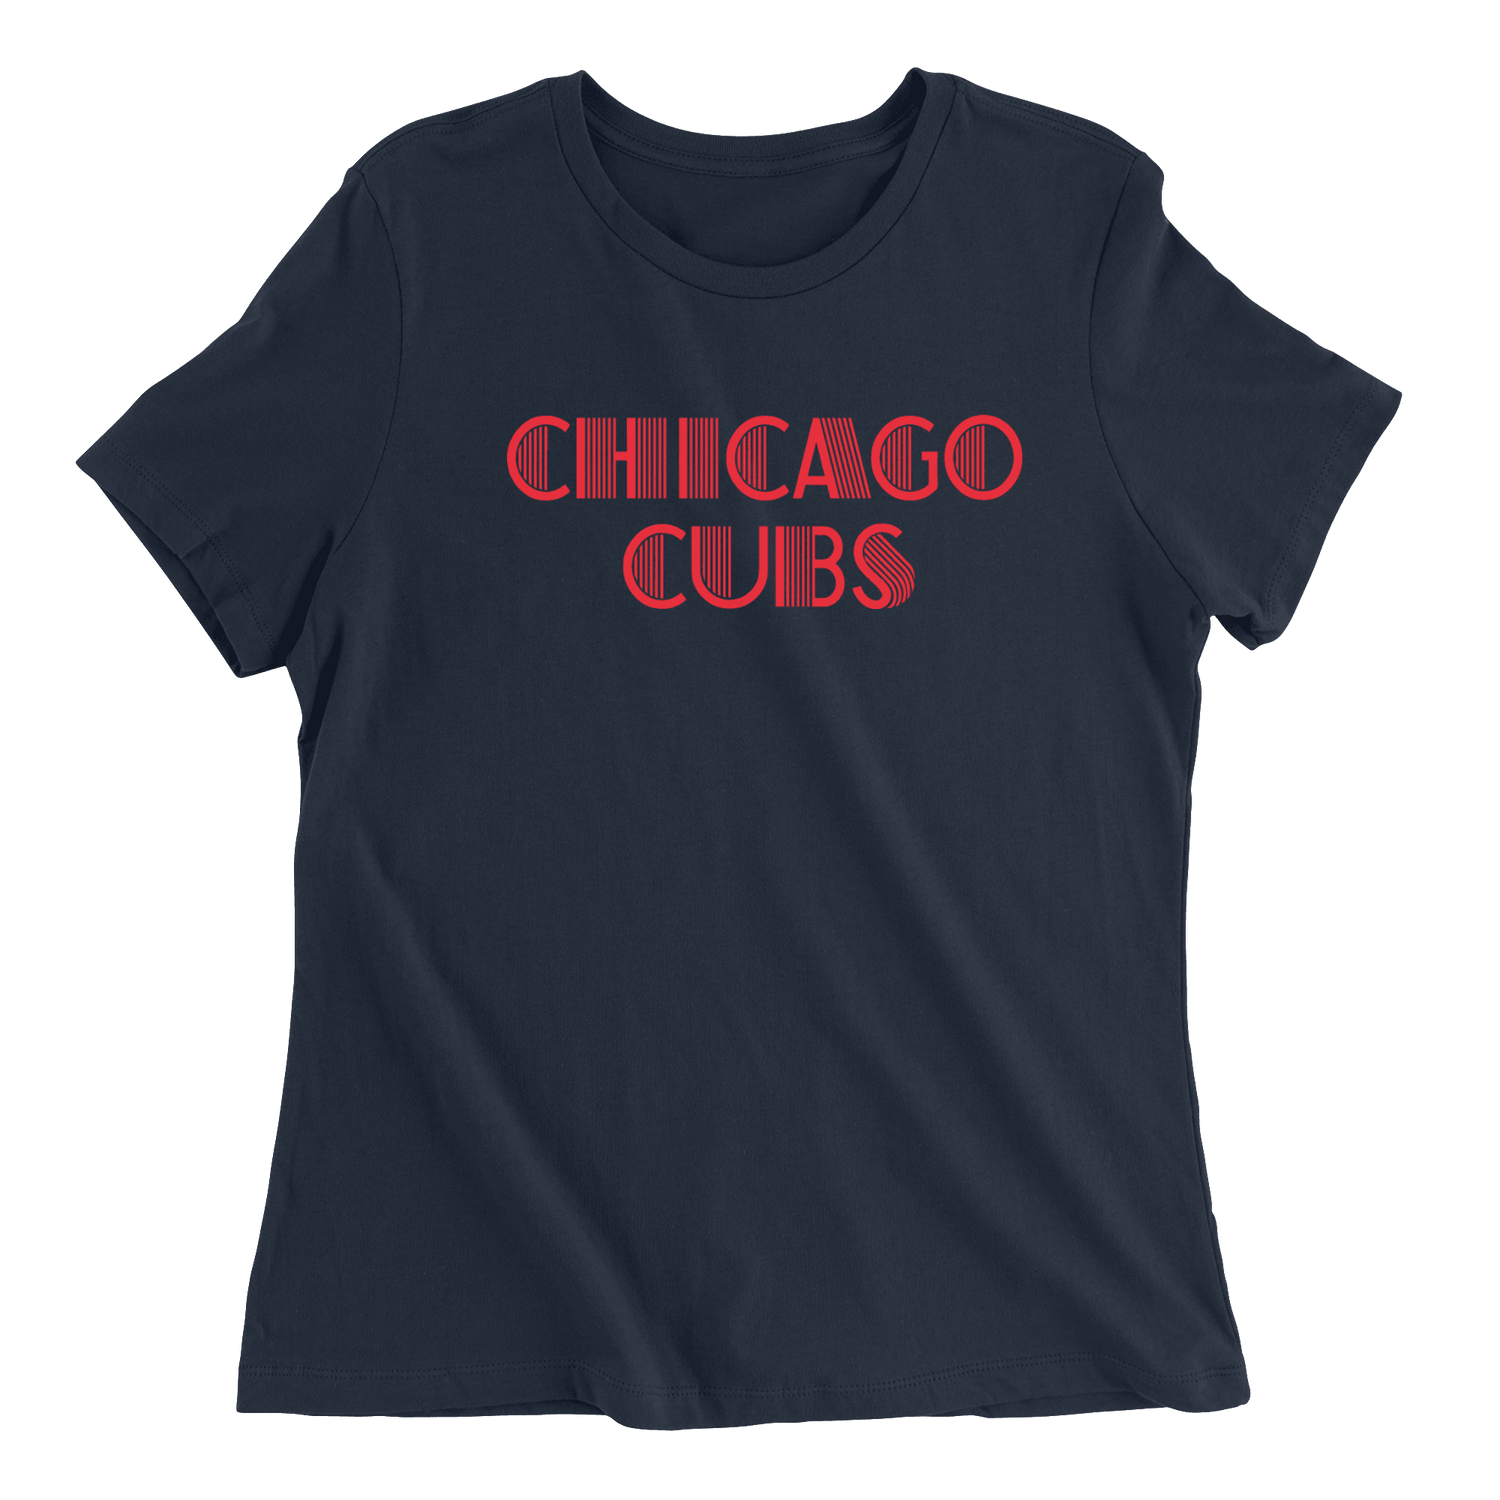 Chicago Cubs - The T-Shirt Deli, Co.